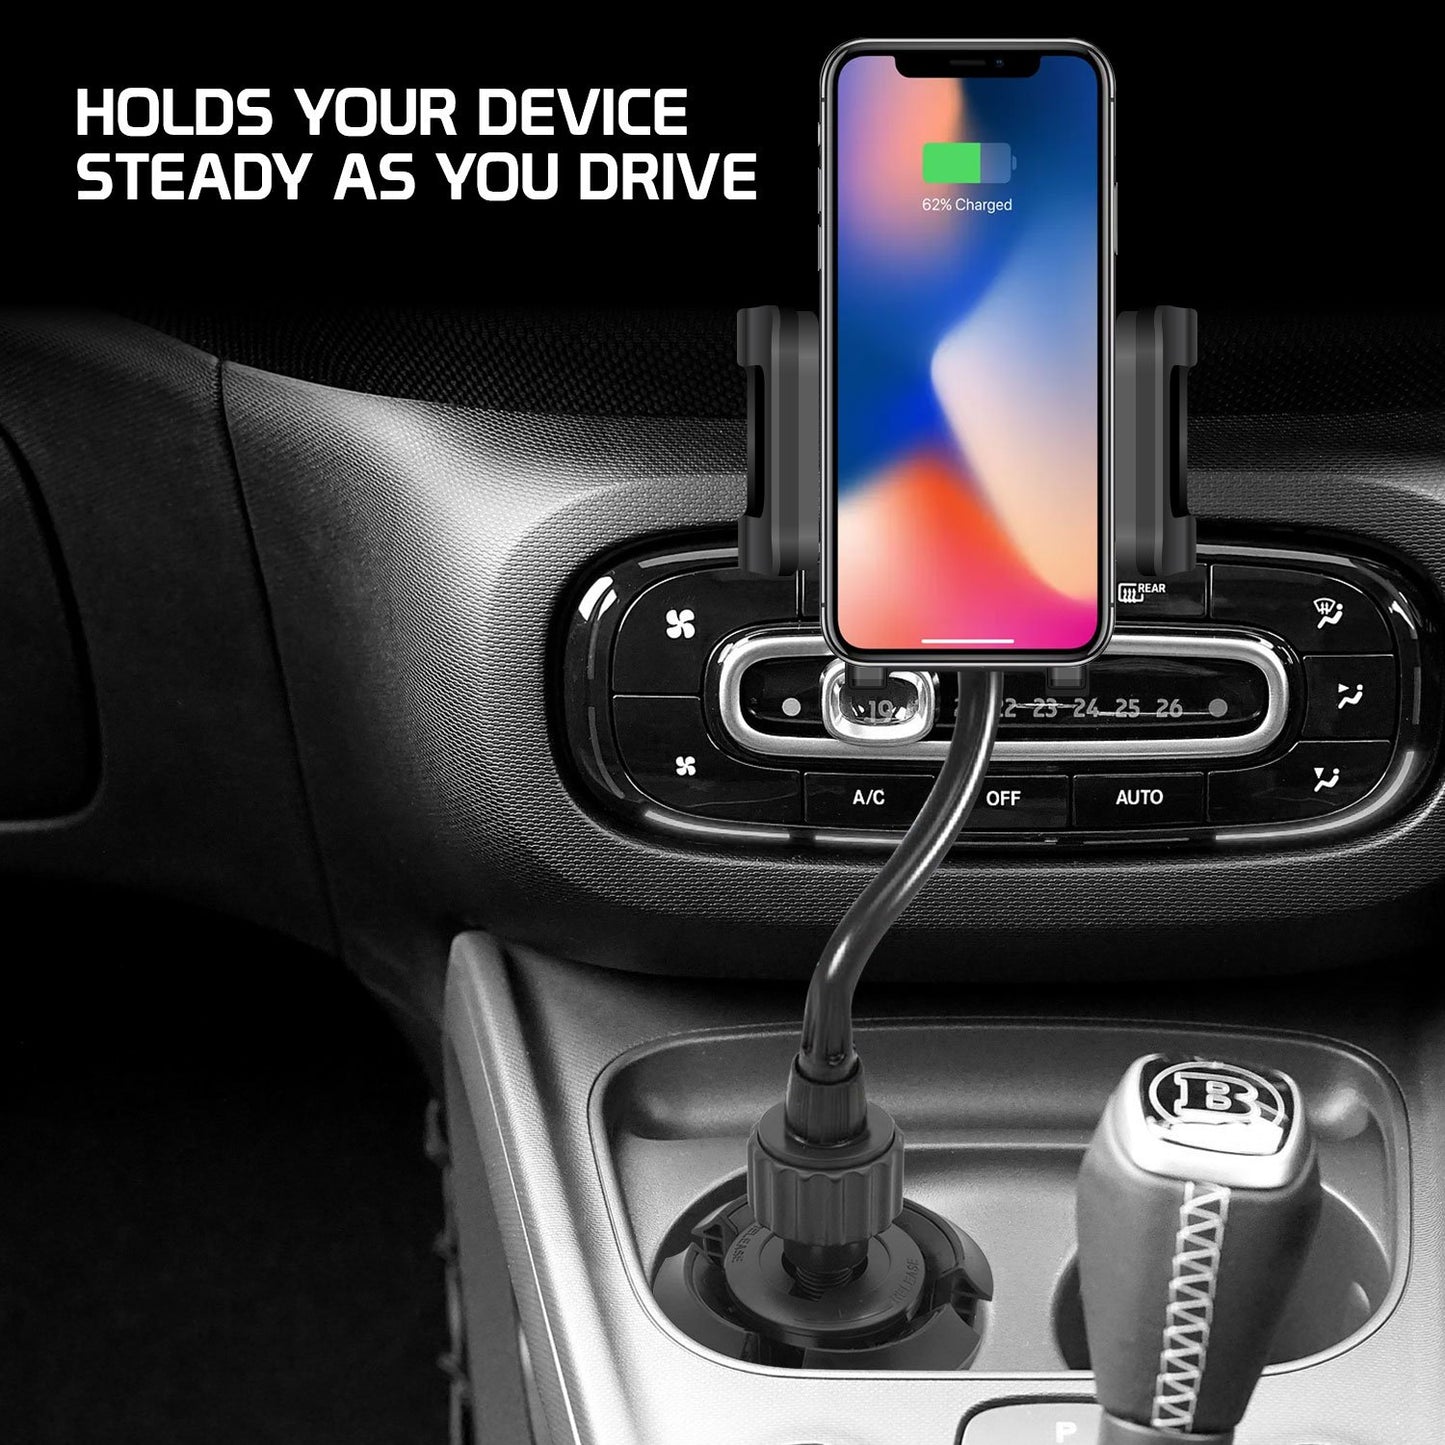 PH650G - Heavy Duty Smartphone Mount, Cup Holder Mount with Flexible Gooseneck and 360 Degree Rotation for Smartphones by Cellet